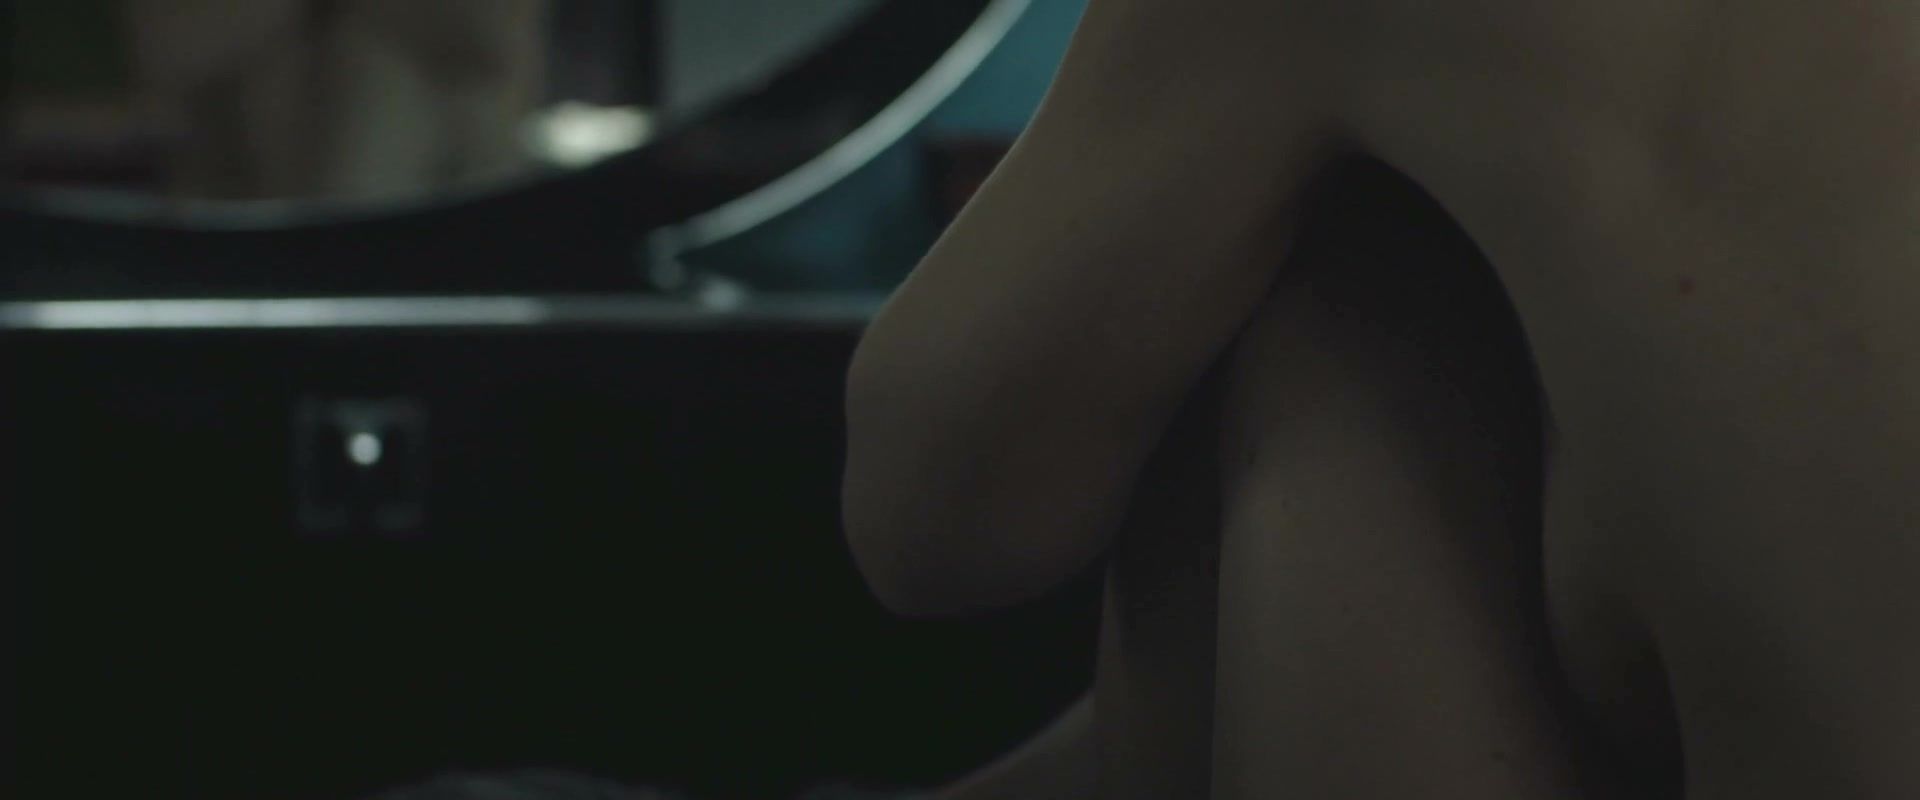 Small Tits Naked Deborah Ann Woll, Adelaide Clemens, Catherine Carlen, Vienna Stampeen nude - The Automatic Hate (2016) Party